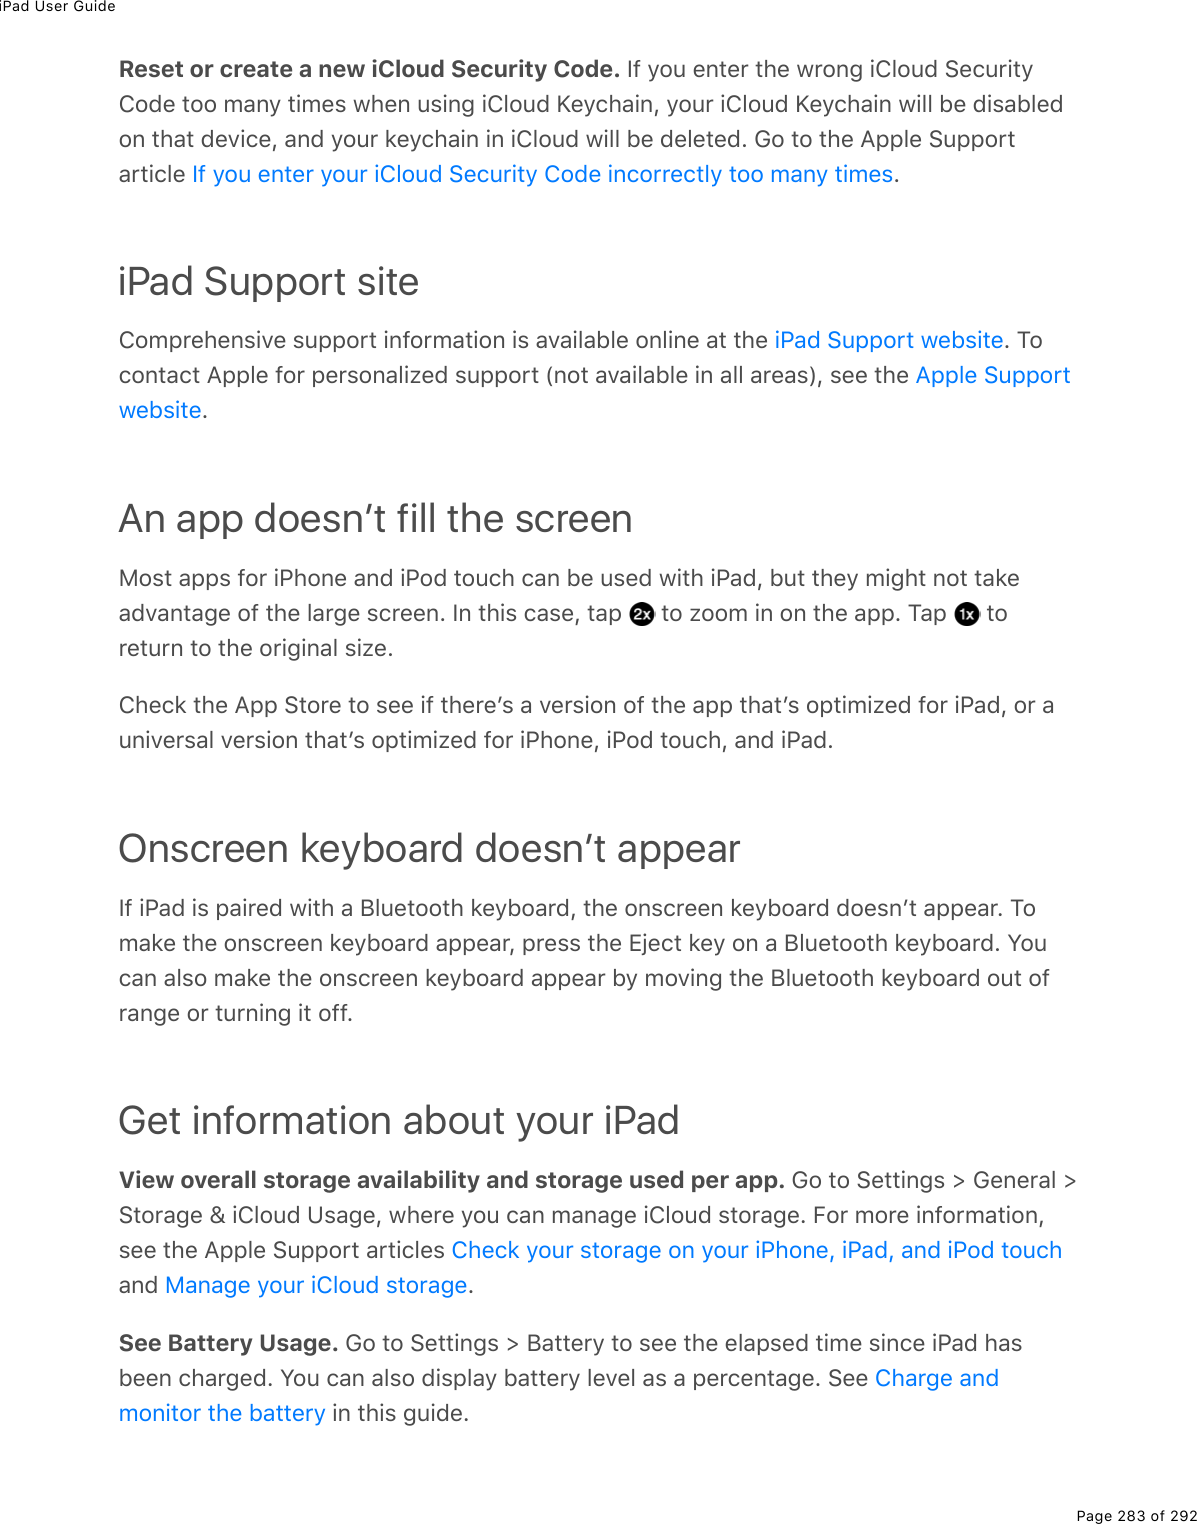 iPad User GuidePage 283 of 292Reset or create a new iCloud Security Code. If you enter the wrong iCloud SecurityCode too many times when using iCloud Keychain, your iCloud Keychain will be disabledon that device, and your keychain in iCloud will be deleted. Go to the Apple Supportarticle  .iPad Support siteComprehensive support information is available online at the  . Tocontact Apple for personalized support (not available in all areas), see the .An app doesnʼt fill the screenMost apps for iPhone and iPod touch can be used with iPad, but they might not takeadvantage of the large screen. In this case, tap   to zoom in on the app. Tap   toreturn to the original size.Check the App Store to see if thereʼs a version of the app thatʼs optimized for iPad, or auniversal version thatʼs optimized for iPhone, iPod touch, and iPad.Onscreen keyboard doesnʼt appearIf iPad is paired with a Bluetooth keyboard, the onscreen keyboard doesnʼt appear. Tomake the onscreen keyboard appear, press the Eject key on a Bluetooth keyboard. Youcan also make the onscreen keyboard appear by moving the Bluetooth keyboard out ofrange or turning it off.Get information about your iPadView overall storage availability and storage used per app. Go to Settings &gt; General &gt;Storage &amp; iCloud Usage, where you can manage iCloud storage. For more information,see the Apple Support articles and  .See Battery Usage. Go to Settings &gt; Battery to see the elapsed time since iPad hasbeen charged. You can also display battery level as a percentage. See  in this guide.If you enter your iCloud Security Code incorrectly too many timesiPad Support websiteApple SupportwebsiteCheck your storage on your iPhone, iPad, and iPod touchManage your iCloud storageCharge andmonitor the battery